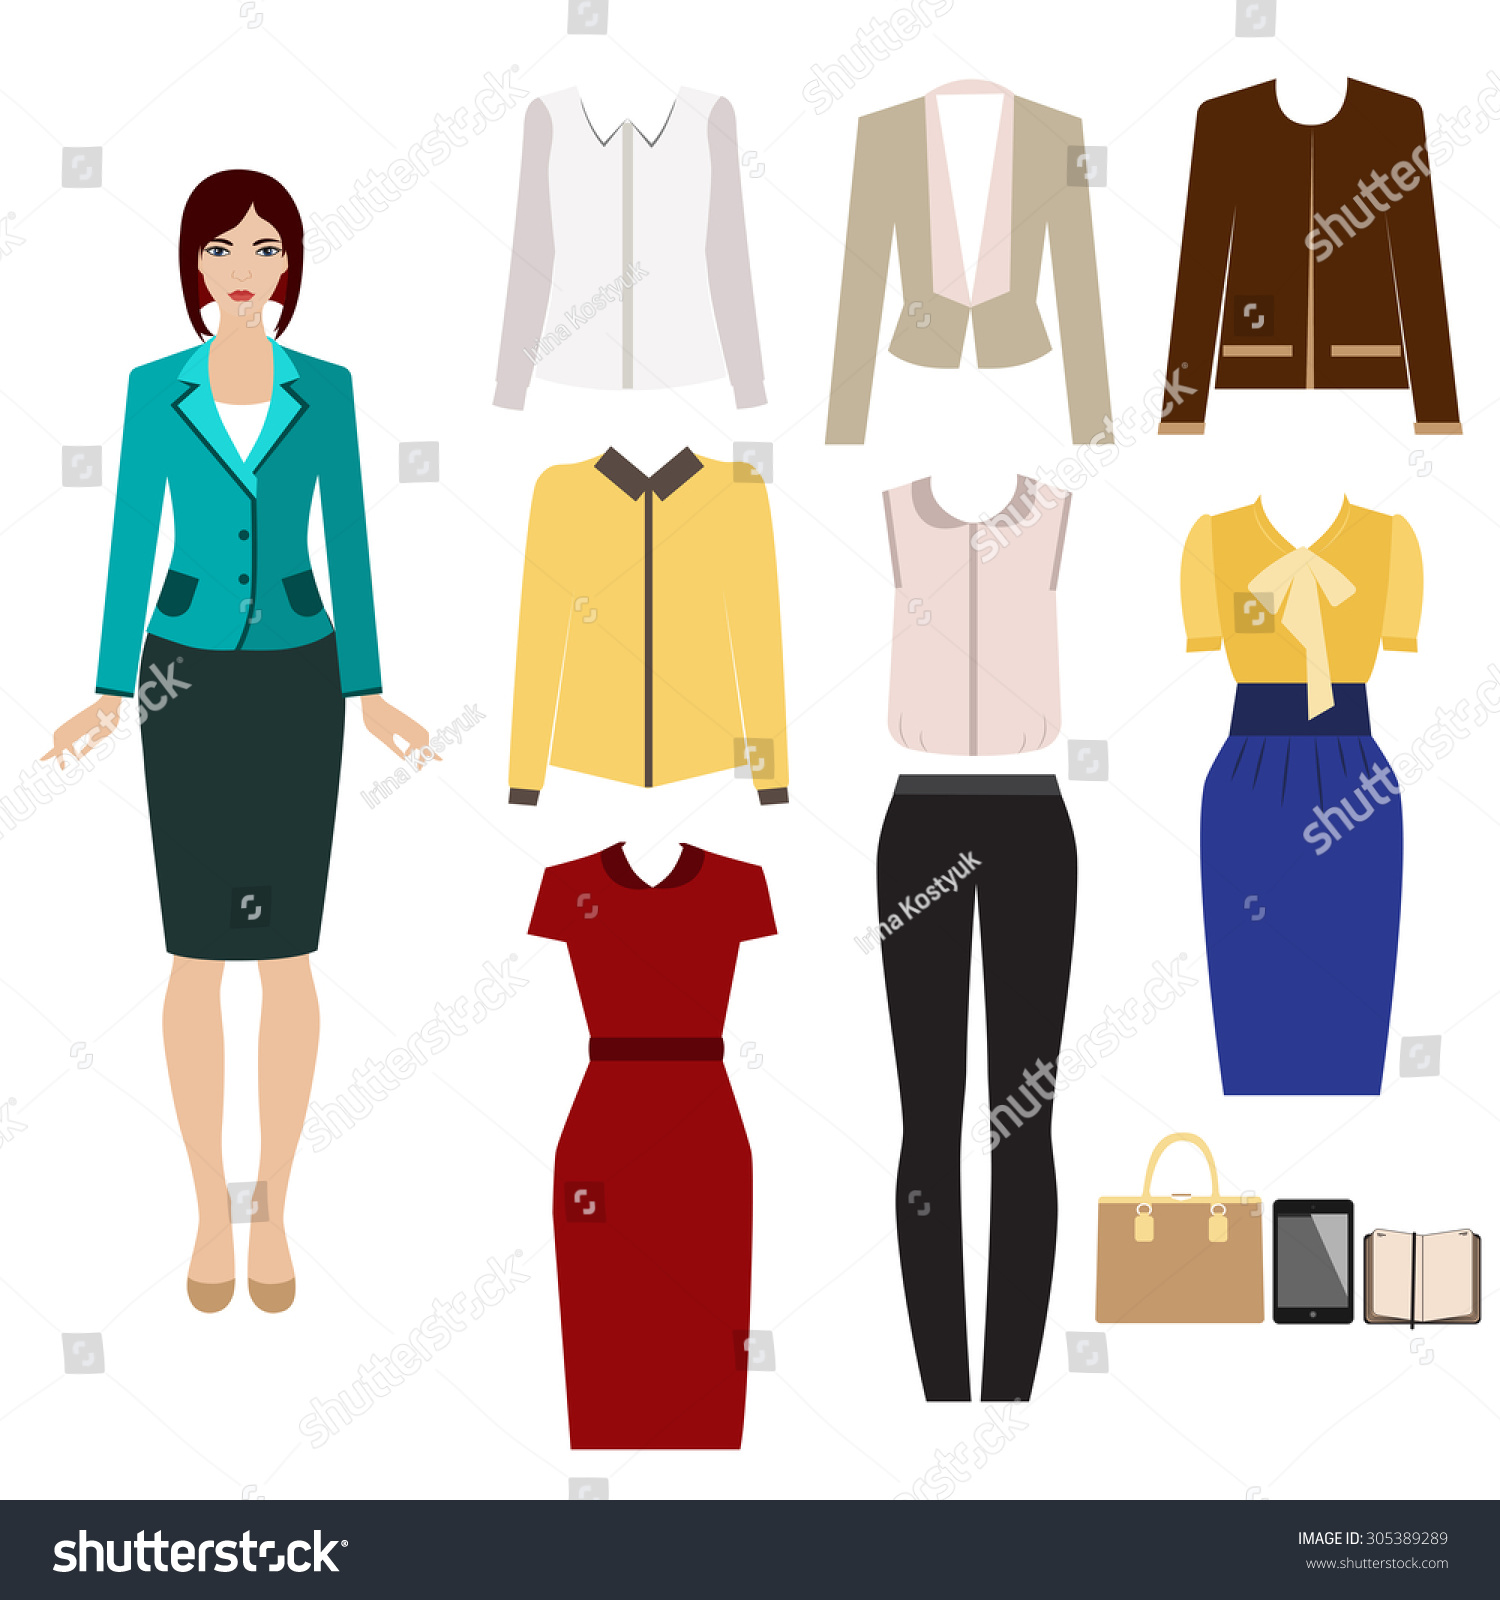 clipart paper doll clothes - photo #17